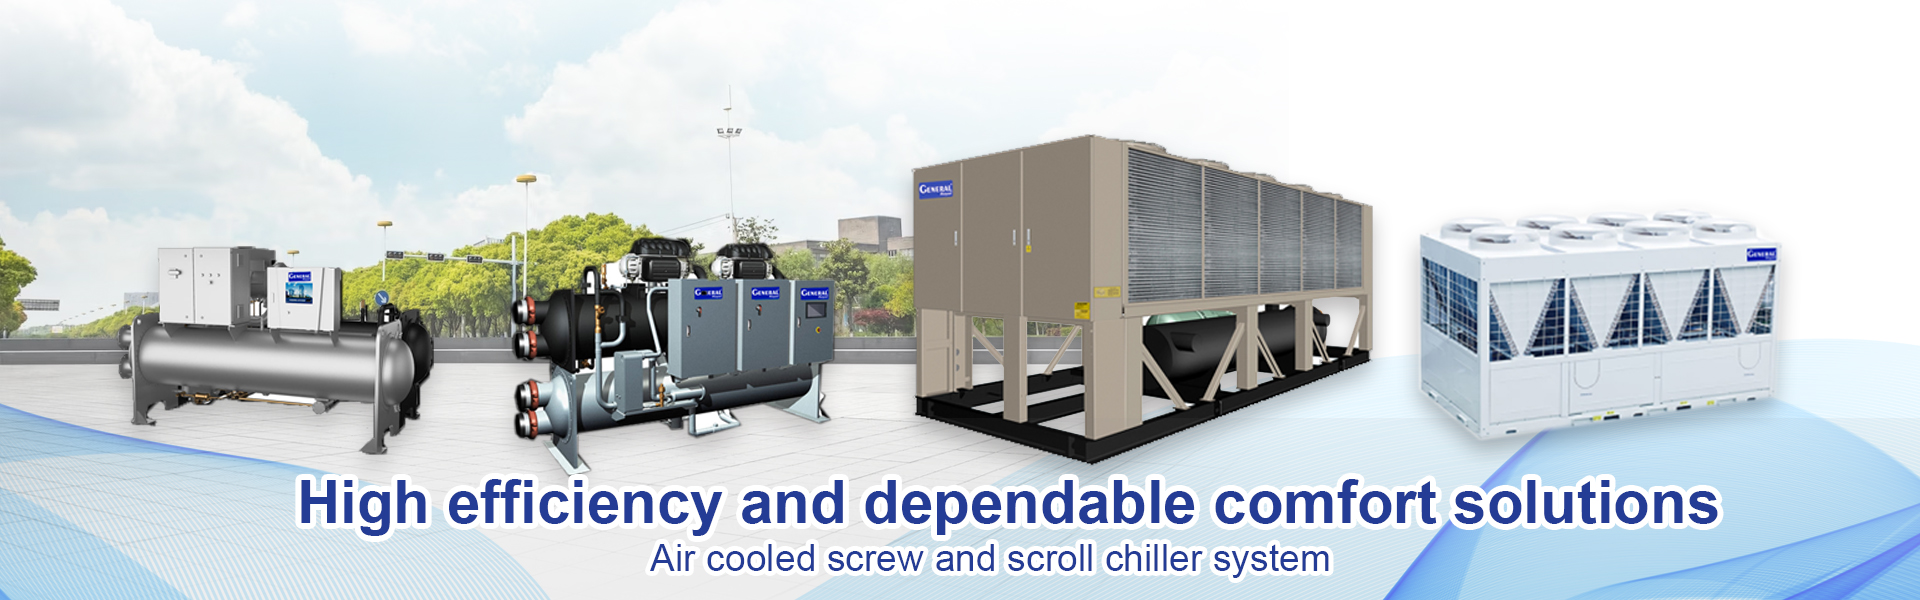 High efficiency and dependable comfort solutions